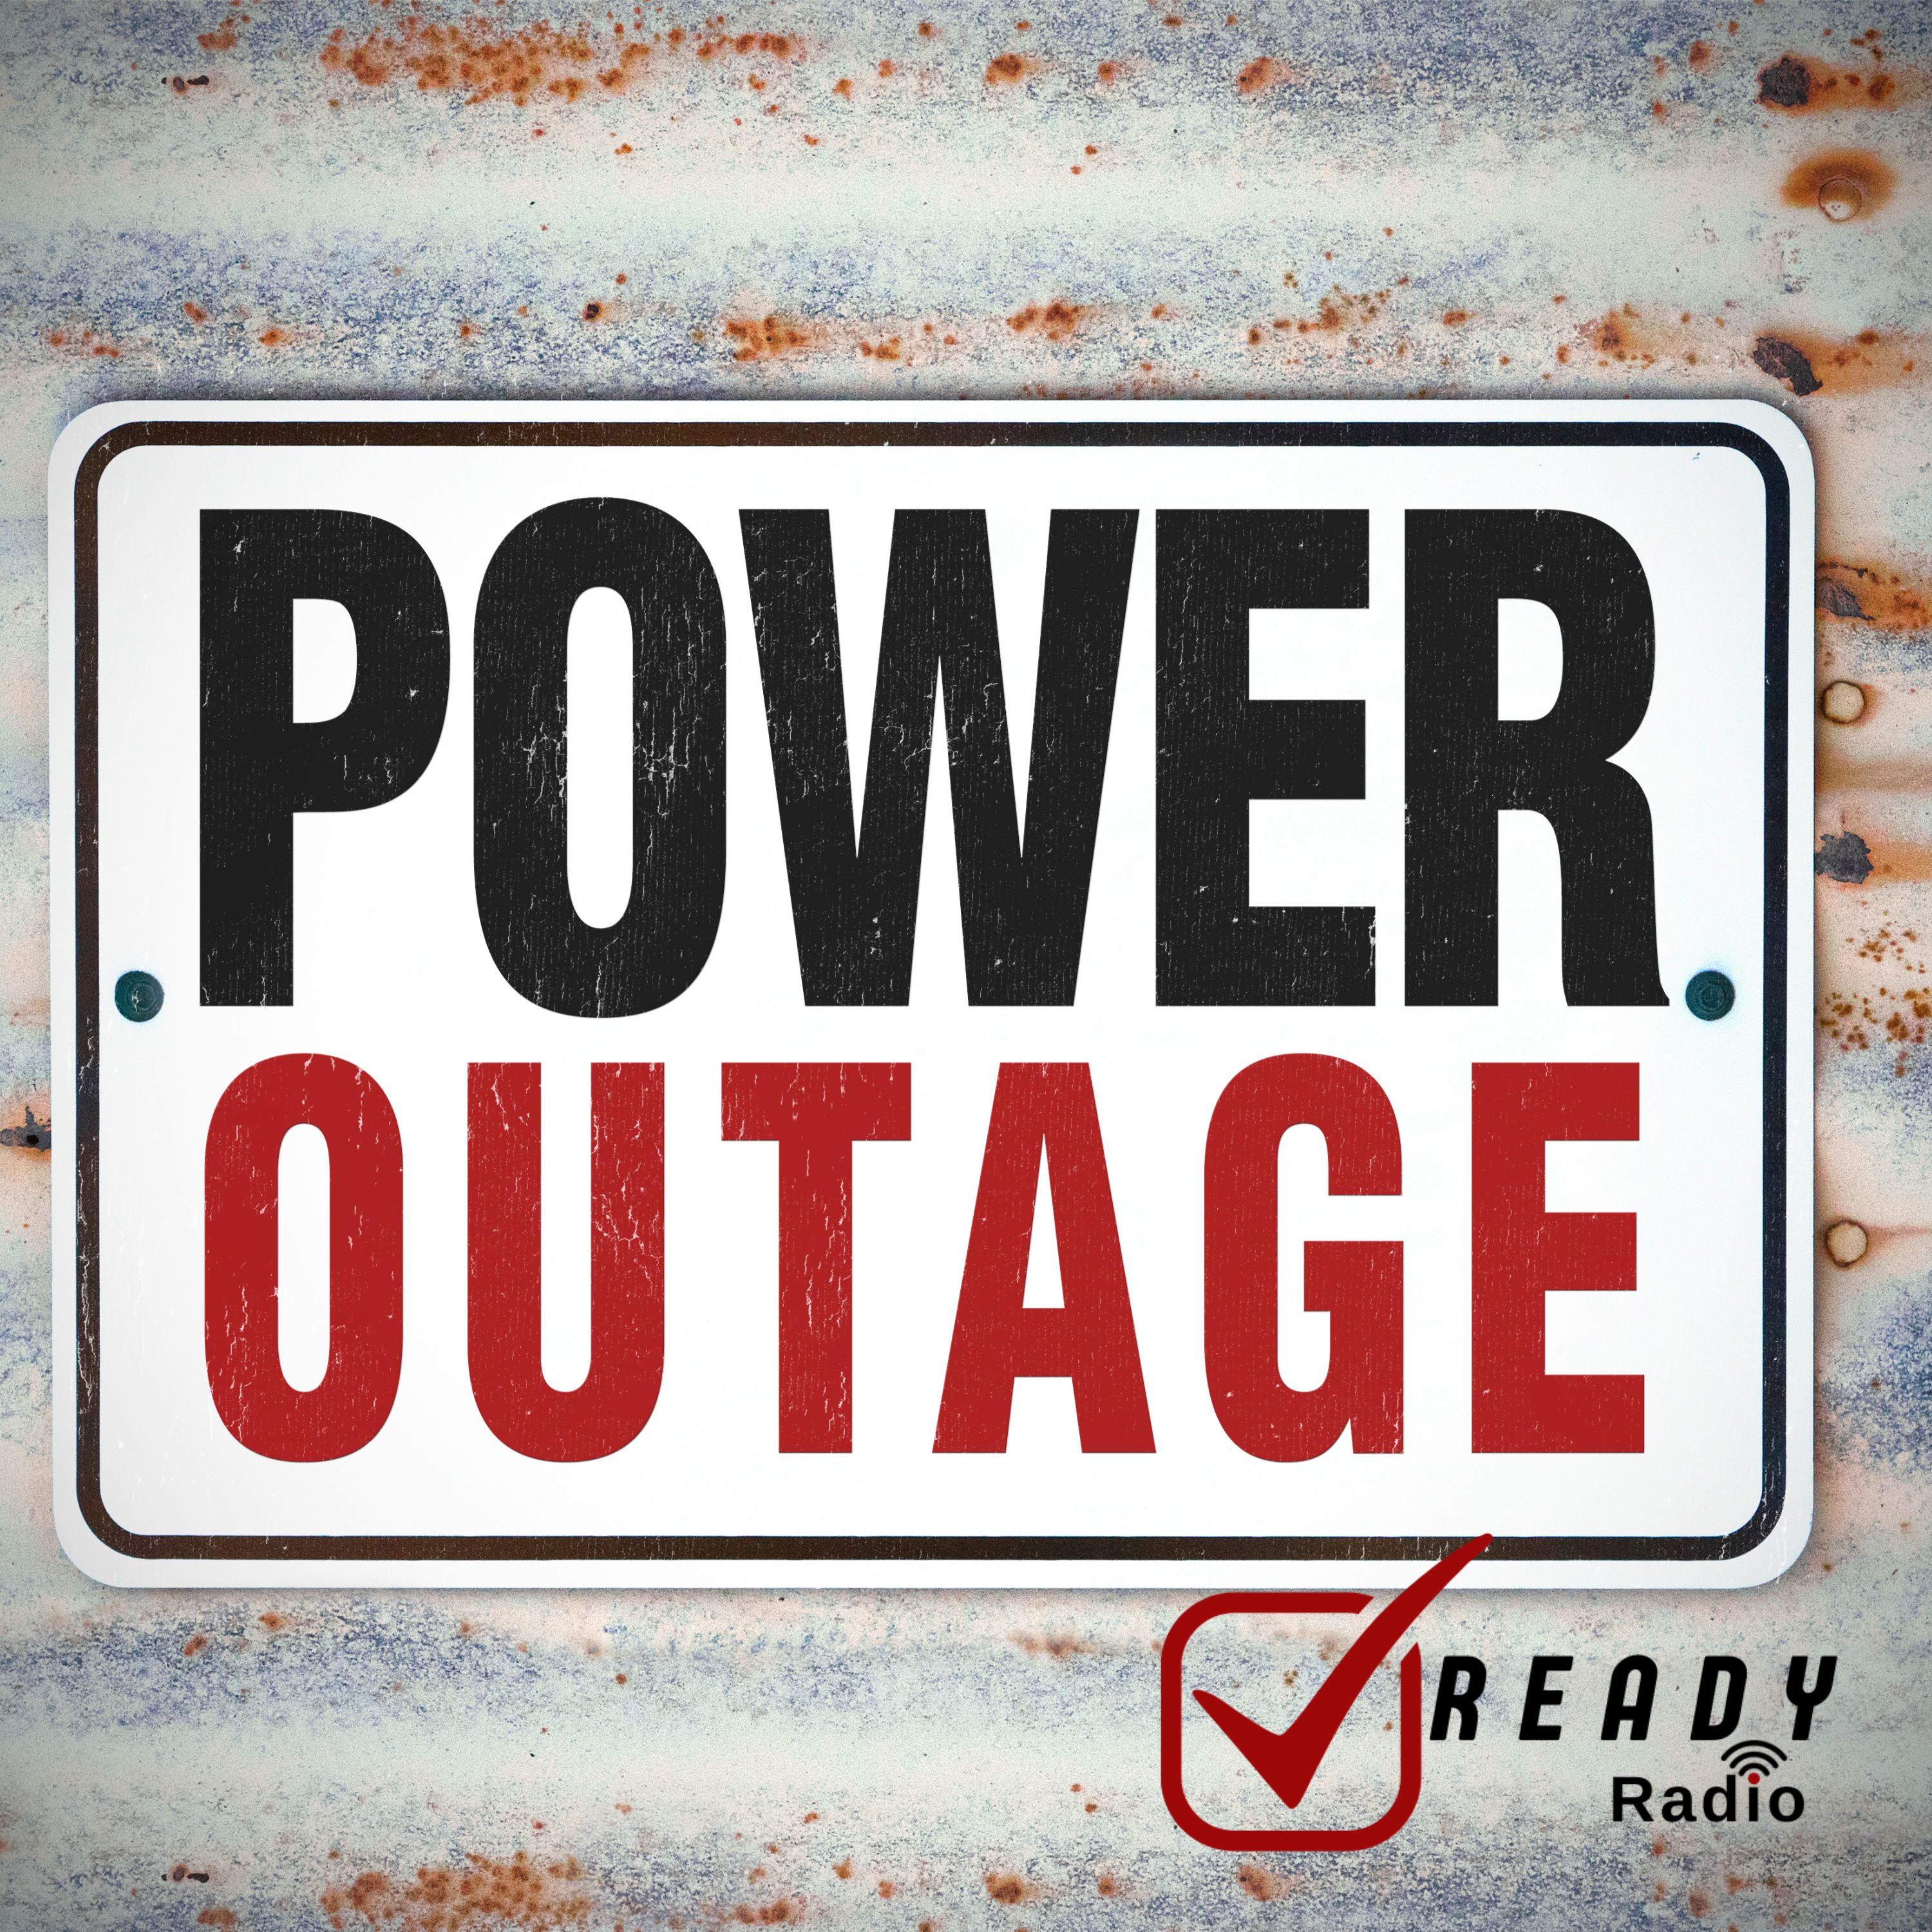 Power Outage Survival Tips. Generators - Which One & Where to Buy